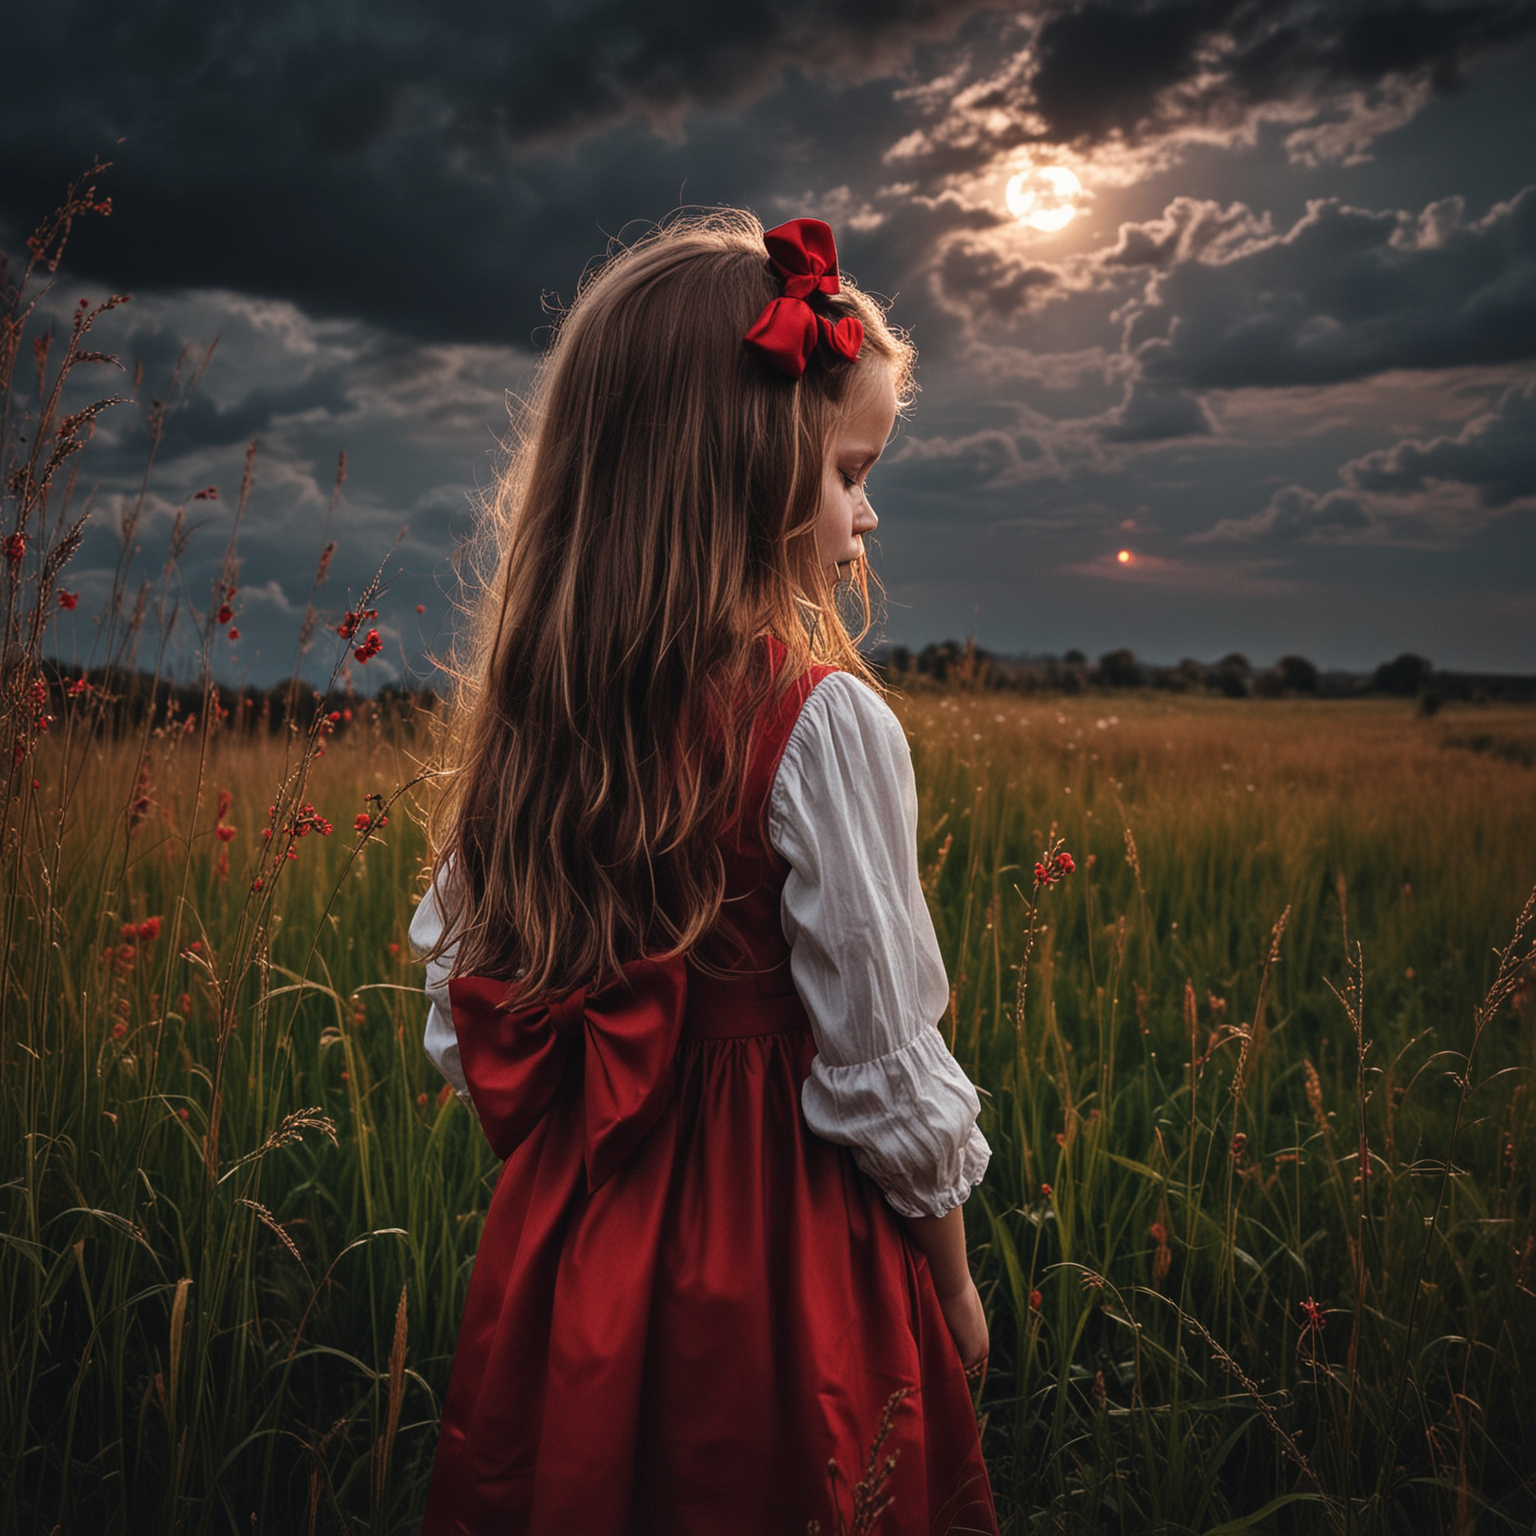 Lonely Child in High Grass Under Stormy Sky with Red Bow